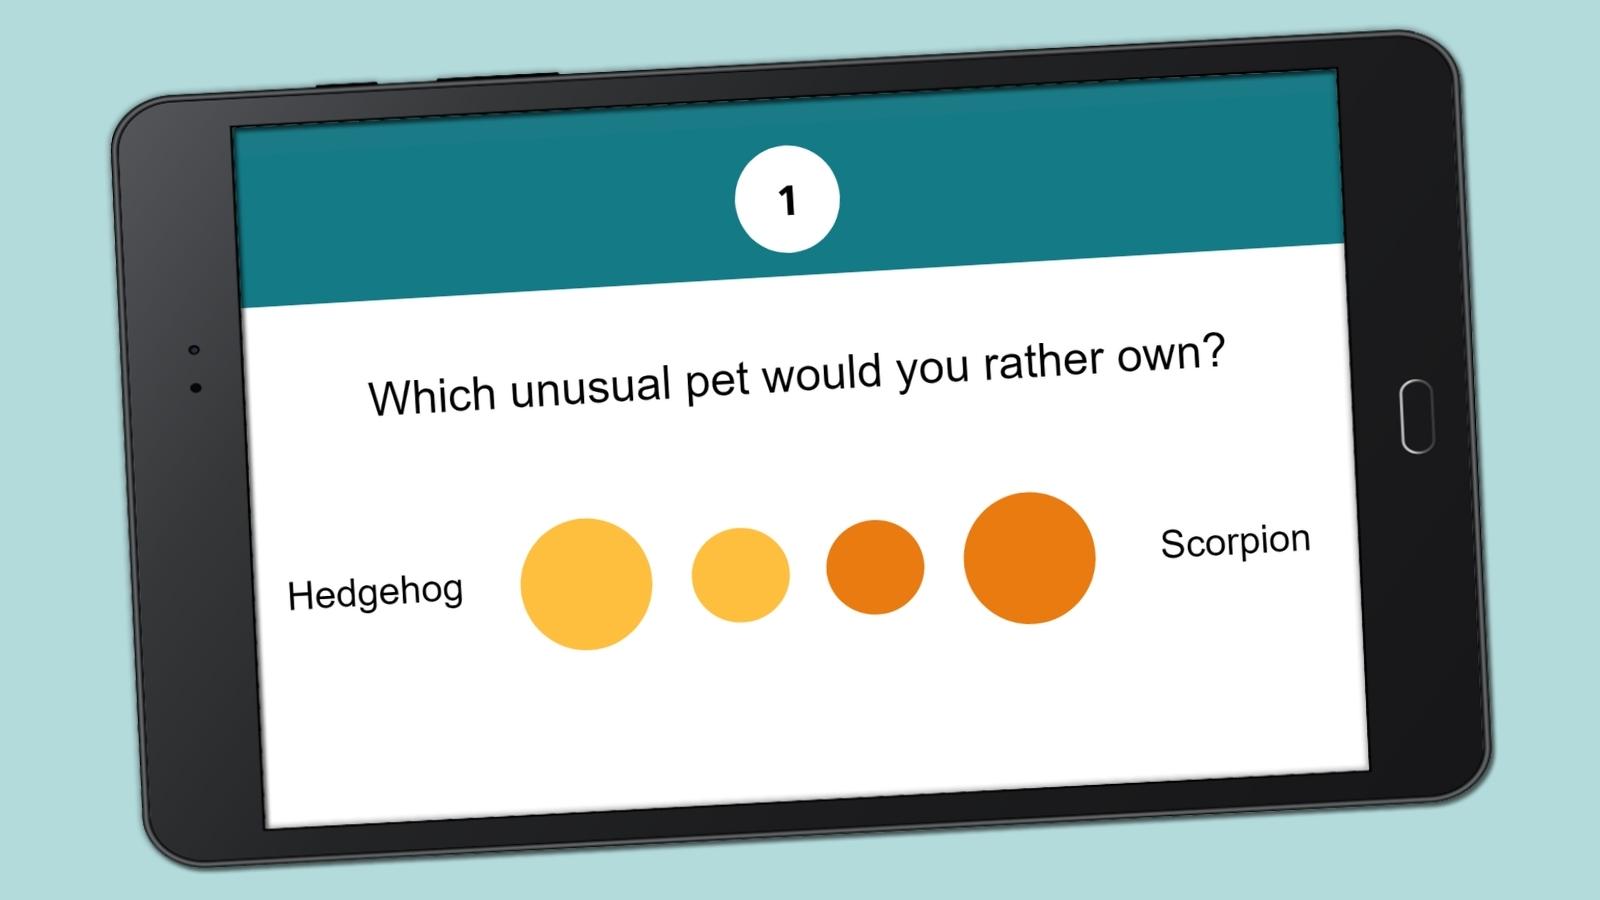 Picture of a slide from an icebreaker game asking students to make choices between one thing or another displayed on a tablet